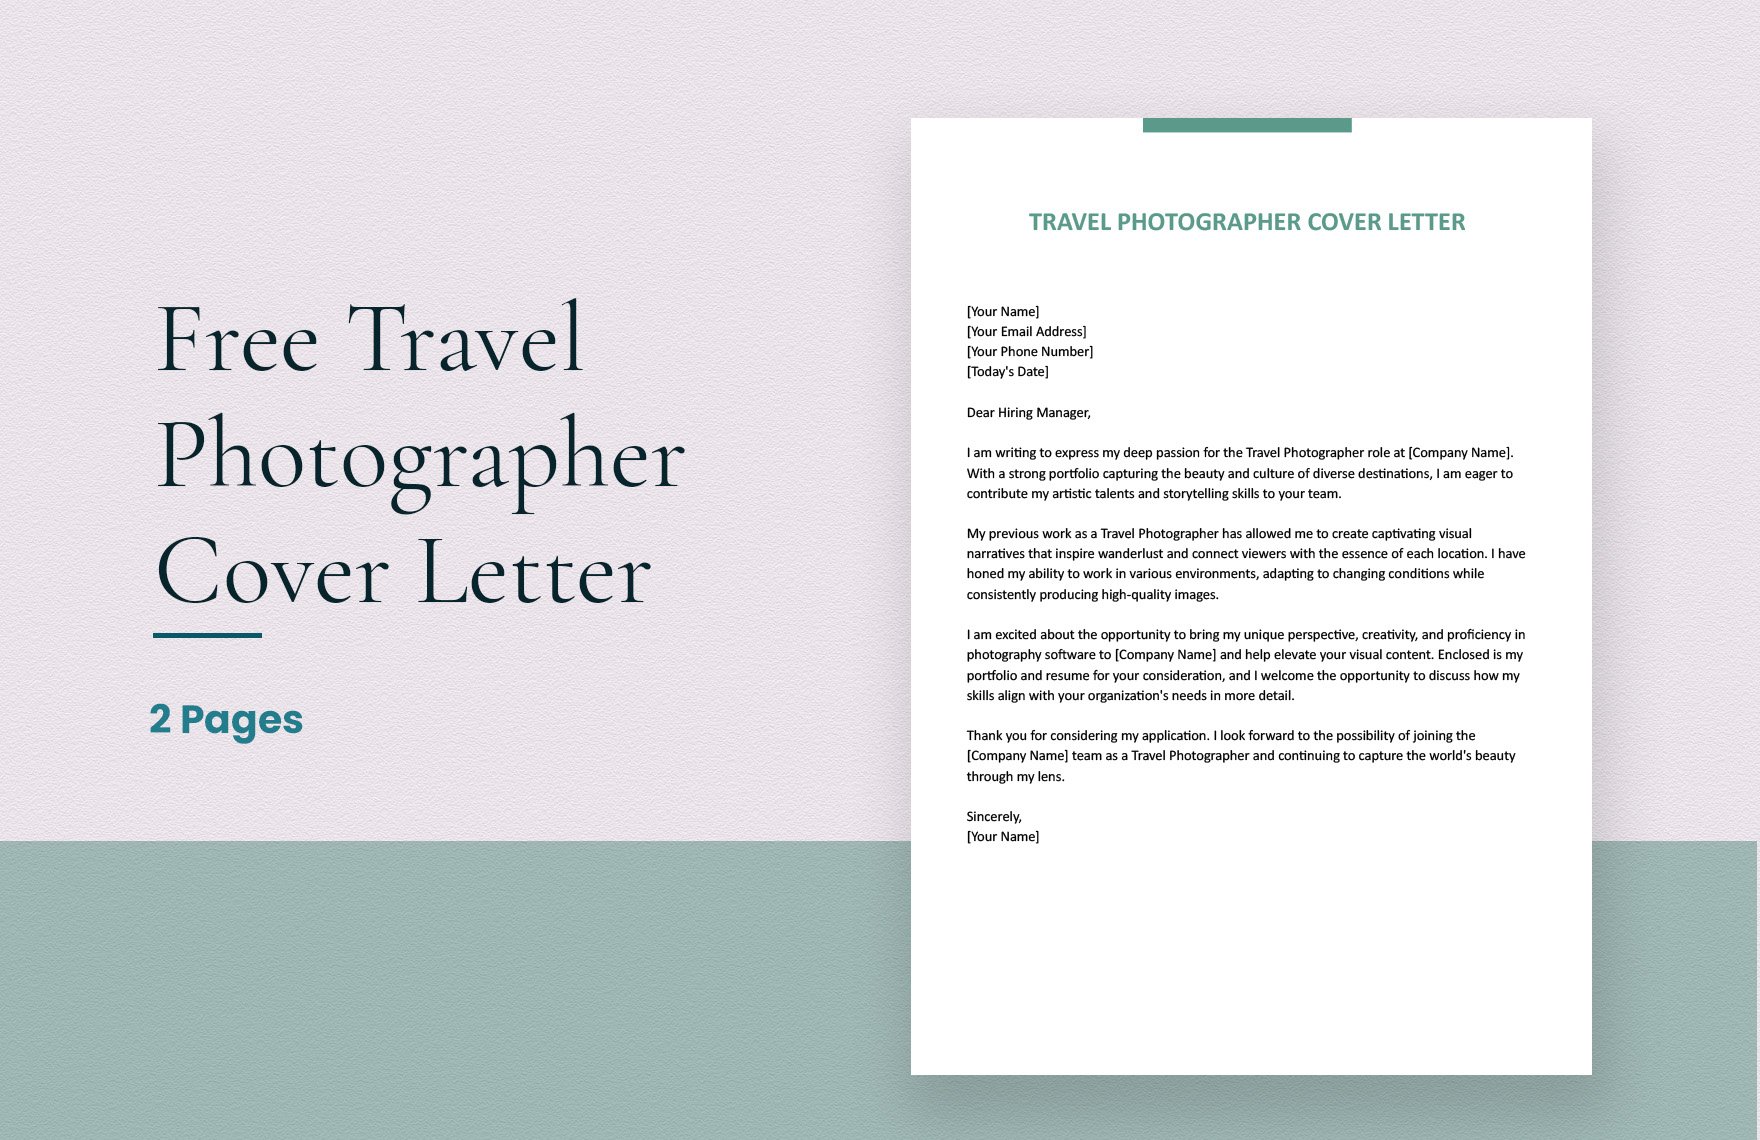 Travel Photographer Cover Letter in Word, Google Docs